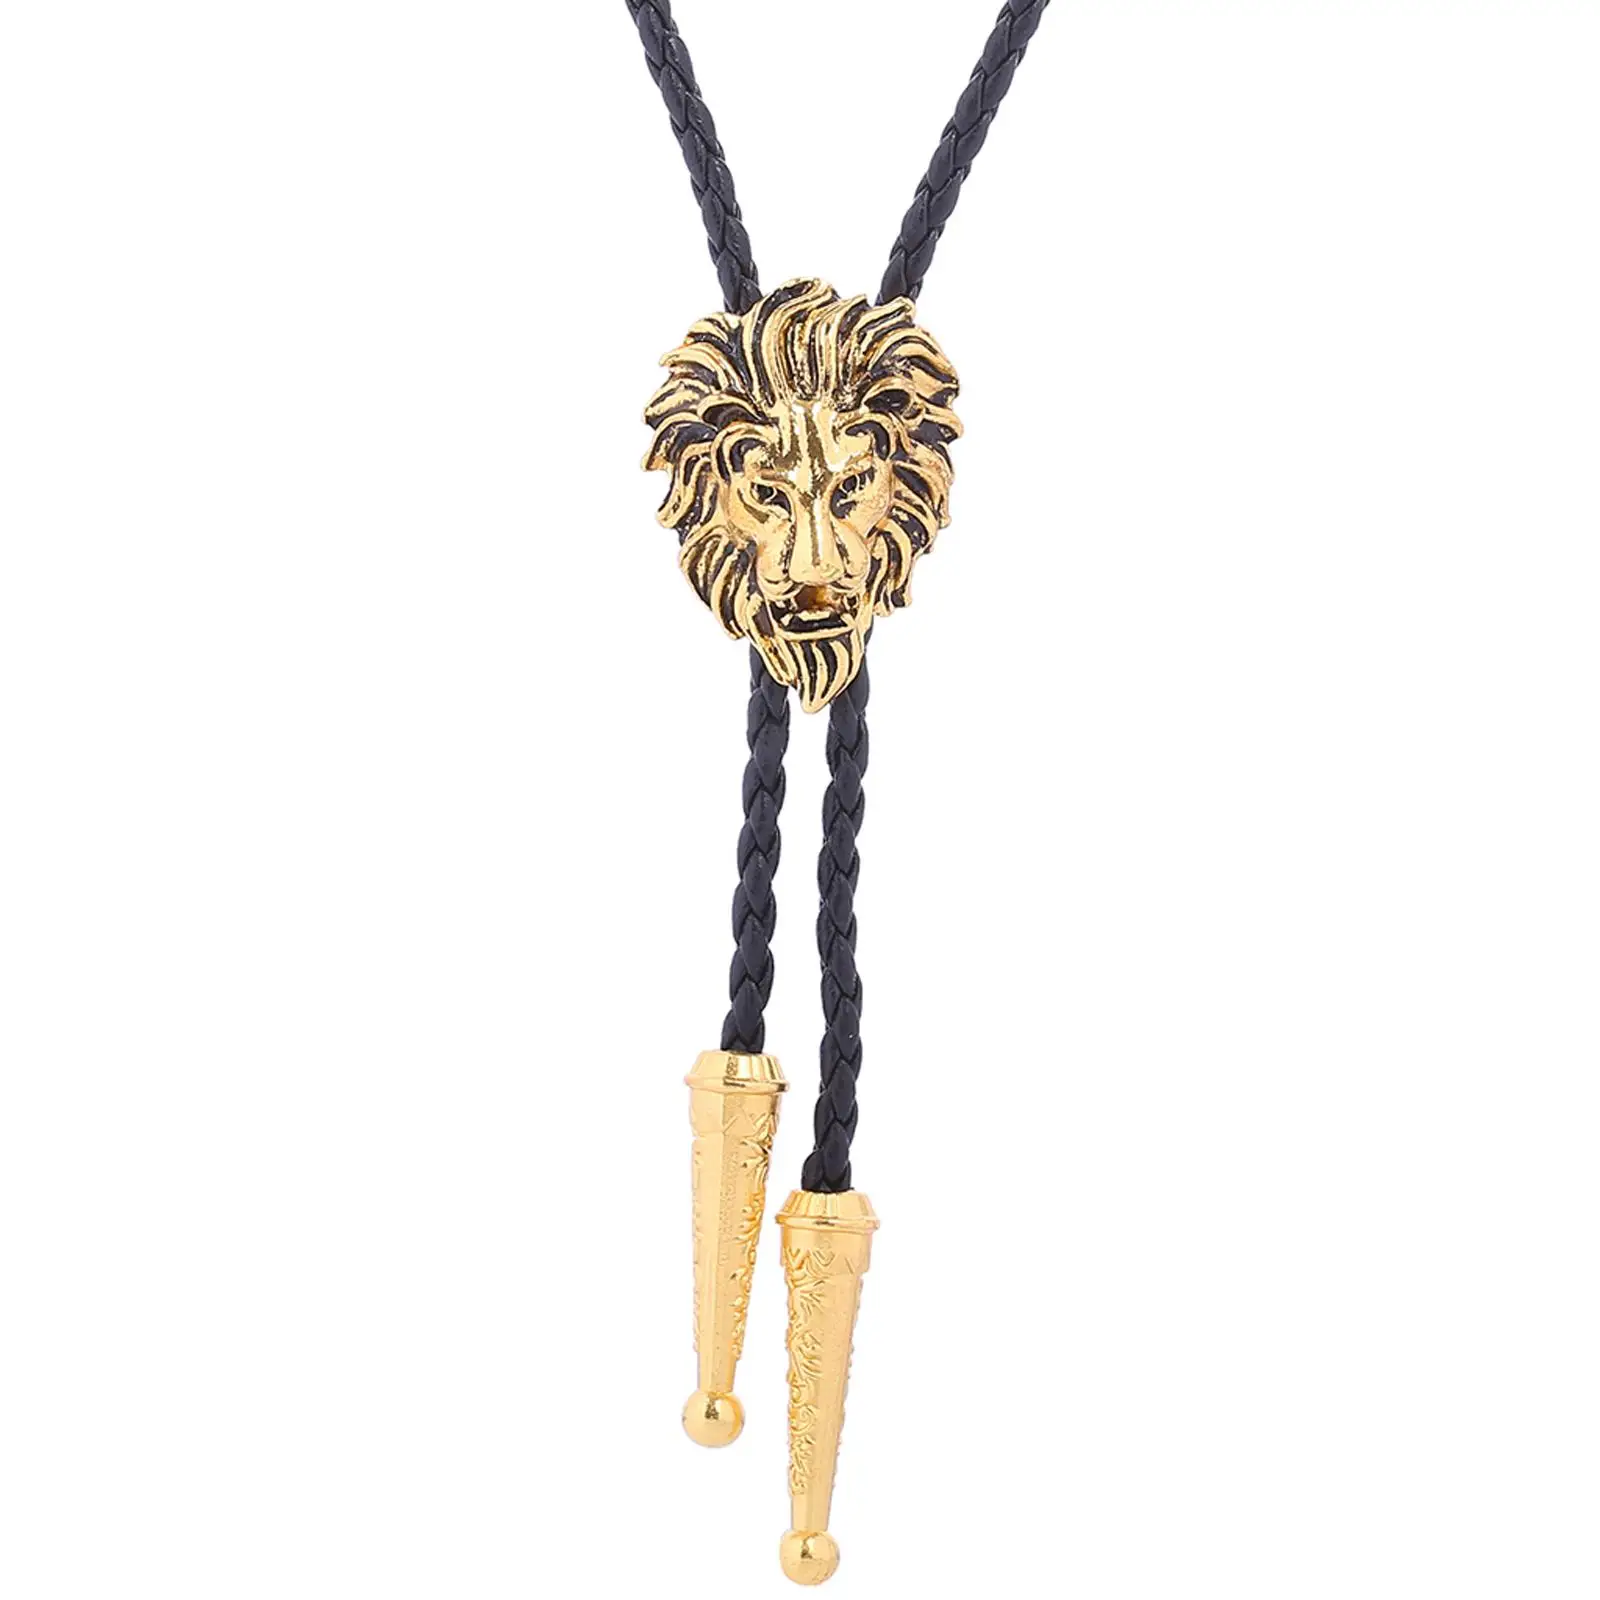 Lion Head Bolo Tie Necktie Leather Accessories Vintage Western Cowboy Rodeo Gift Alloy Necklace for Birthday Party Men and Women